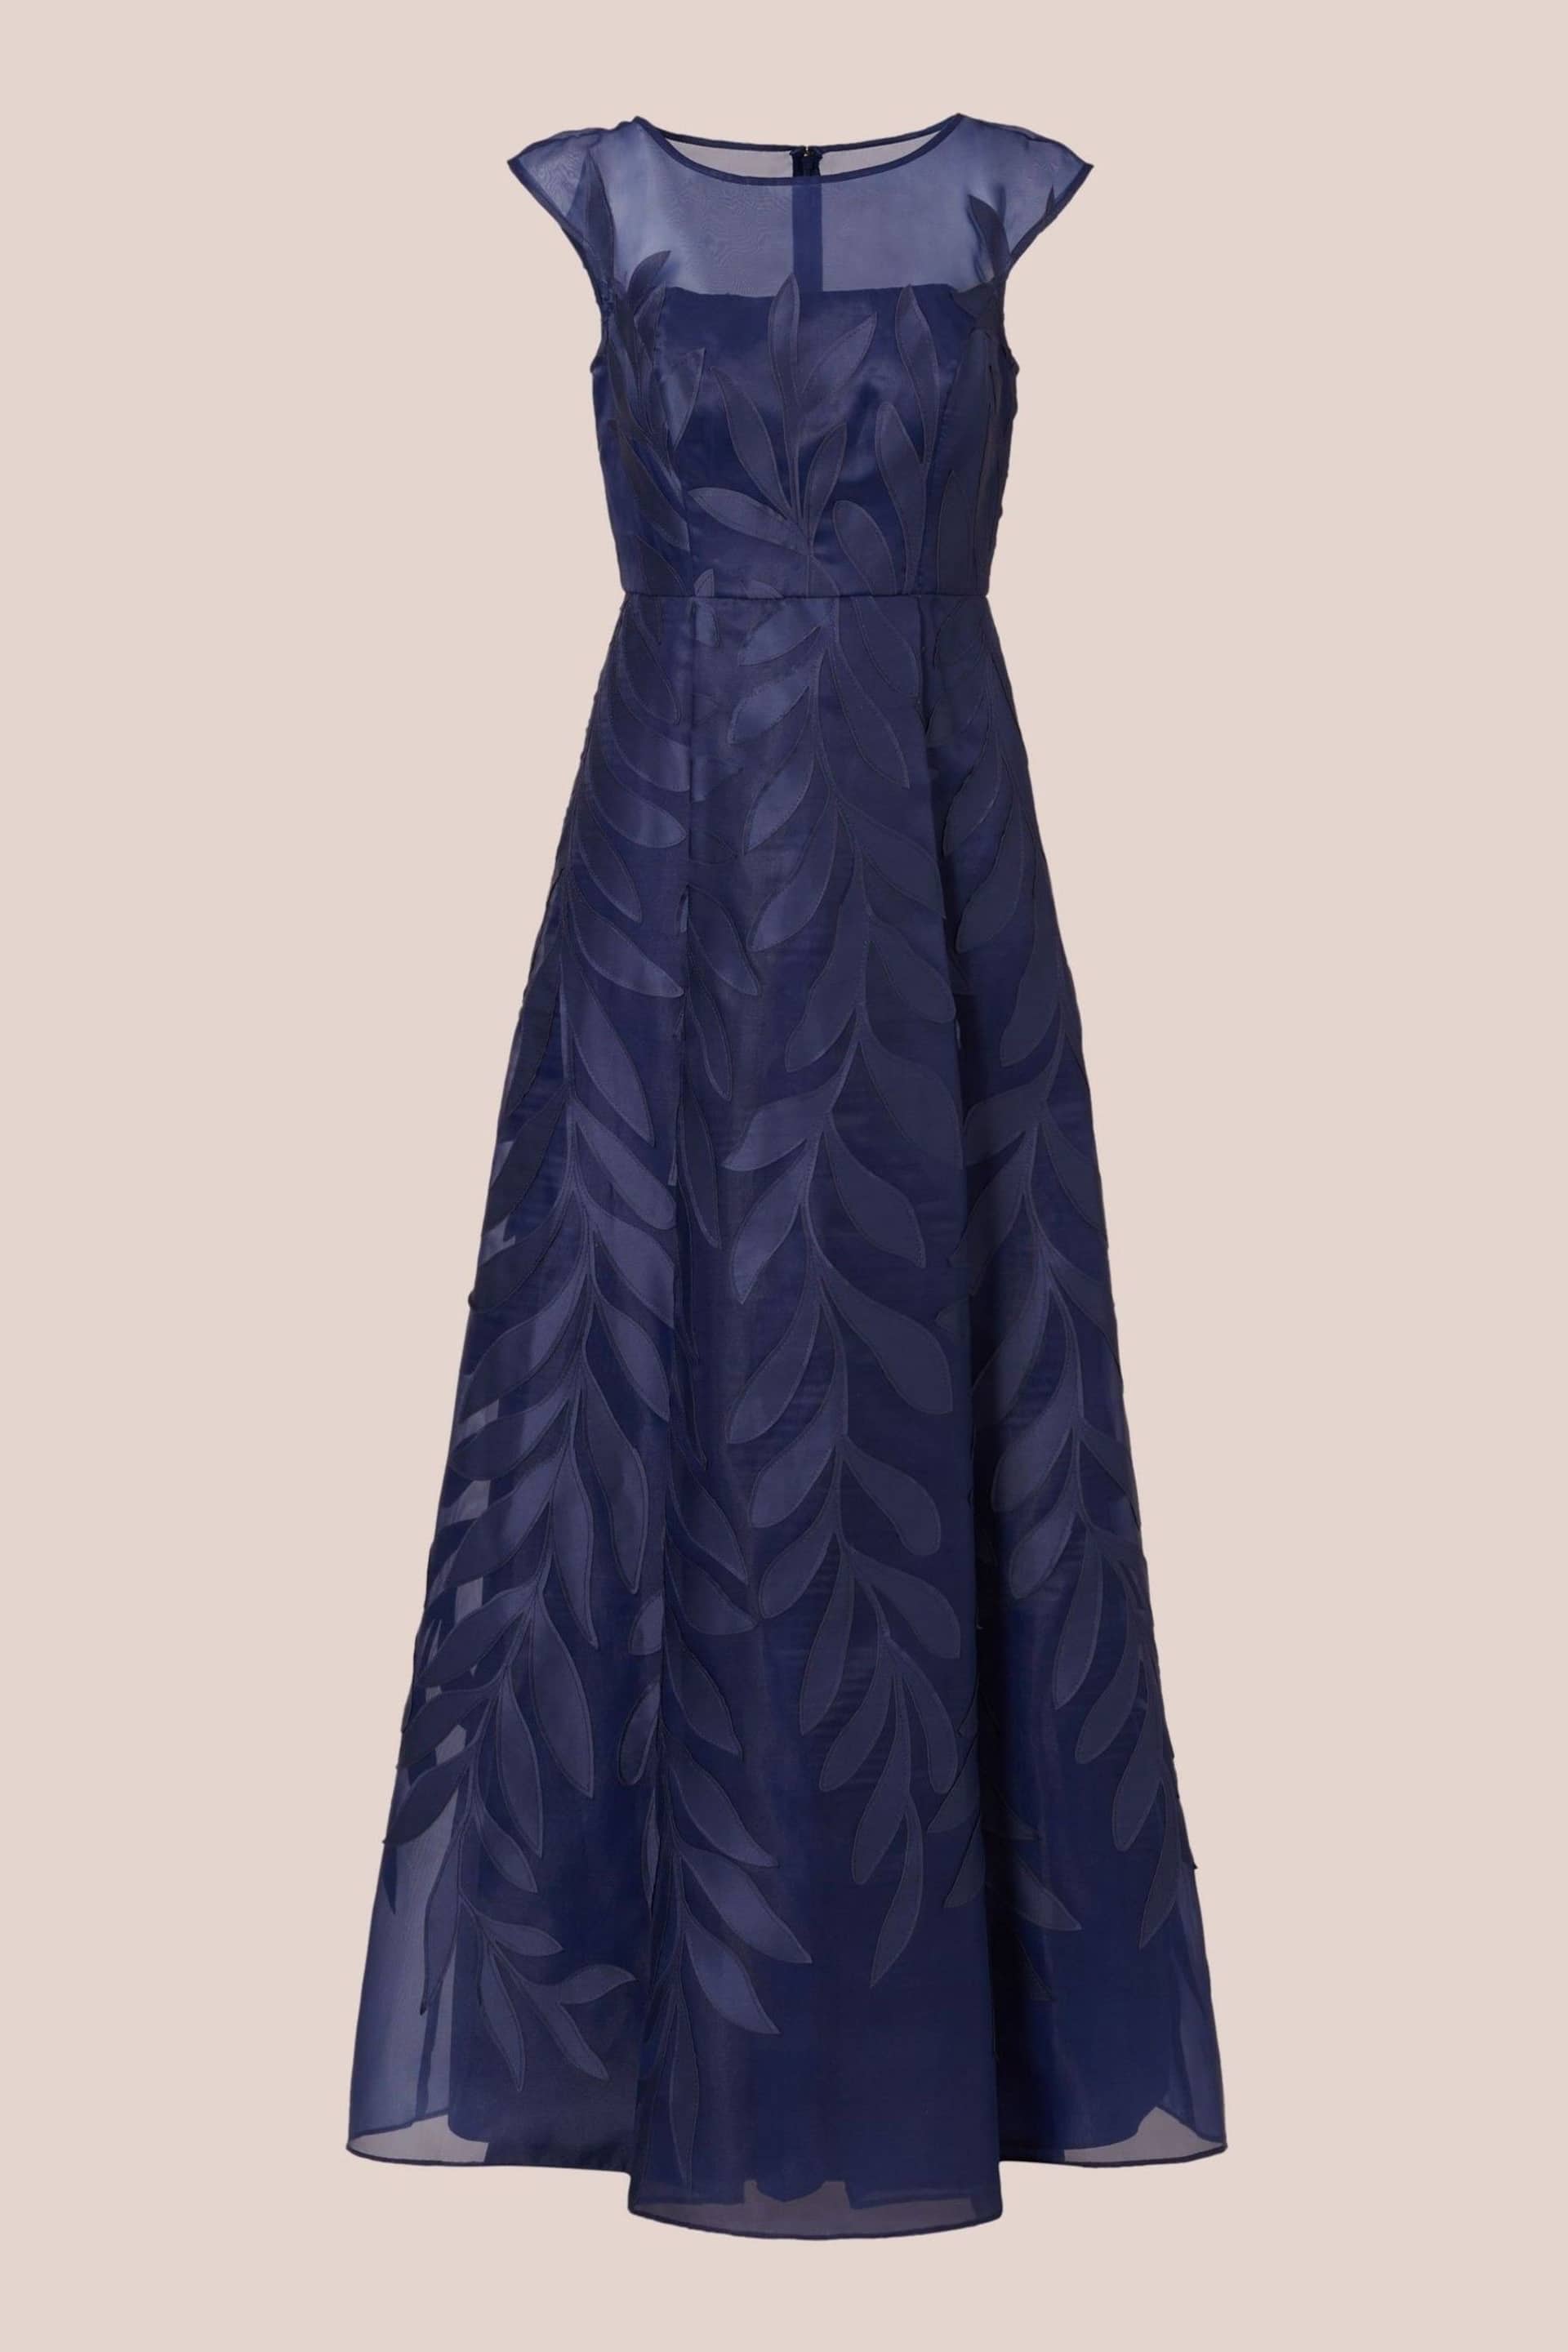 Adrianna Papell Blue Applique Organza Long Gown - Image 6 of 7